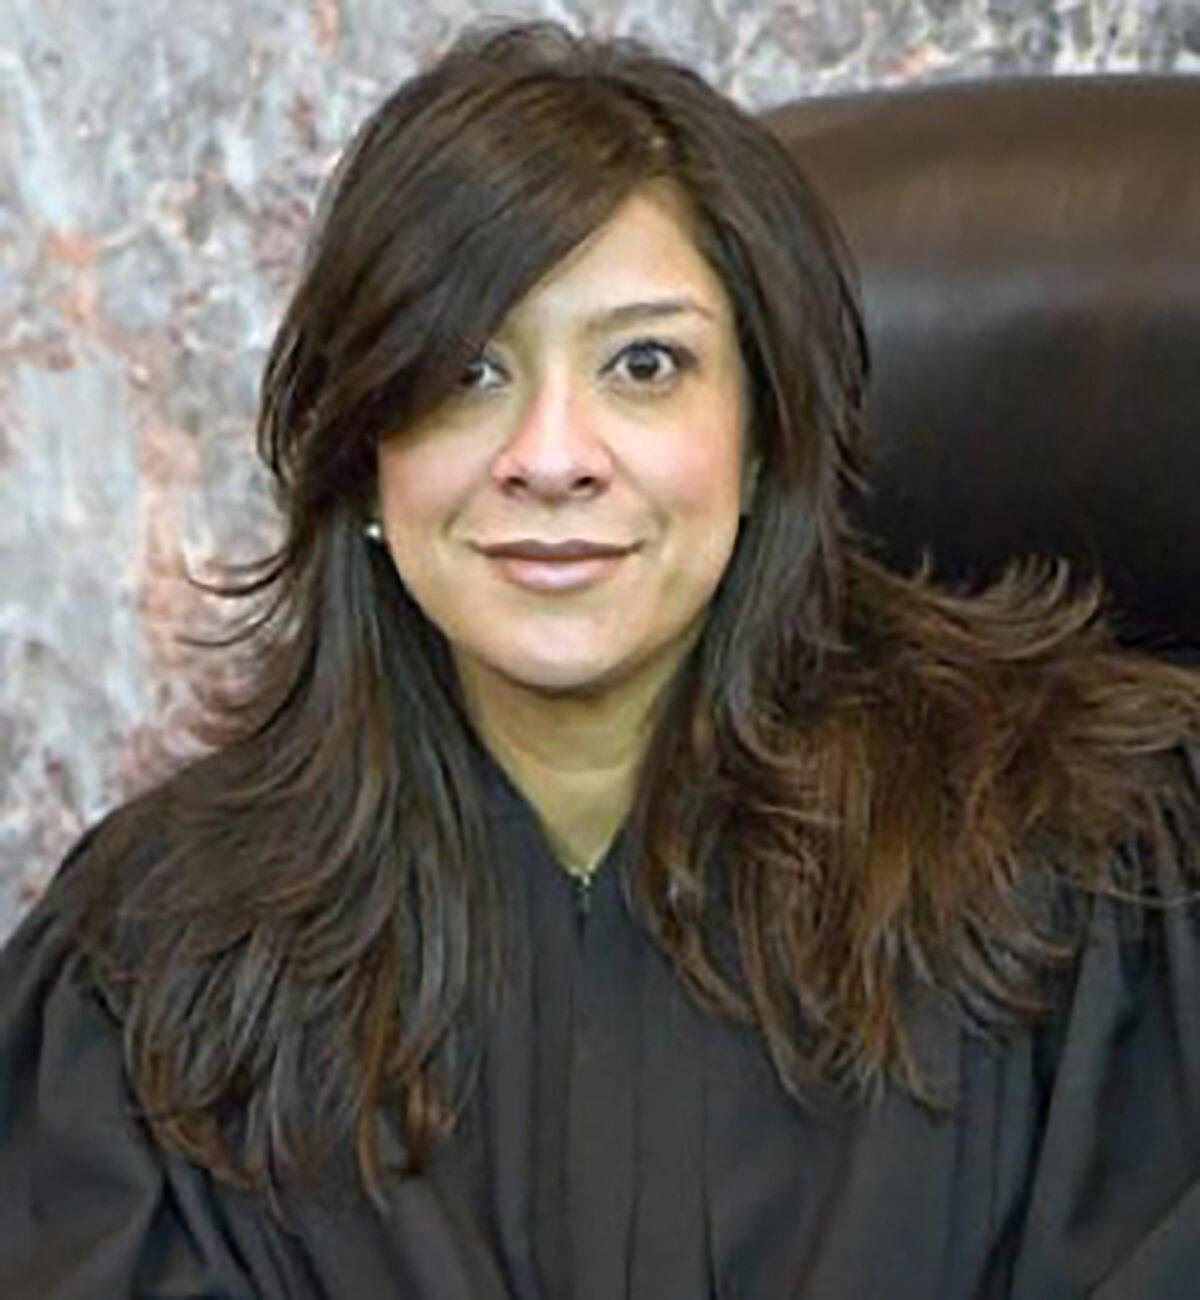 U.S. District Court of New Jersey Judge Esther Salas in a file photograph. (Courtesy of Rutgers University)